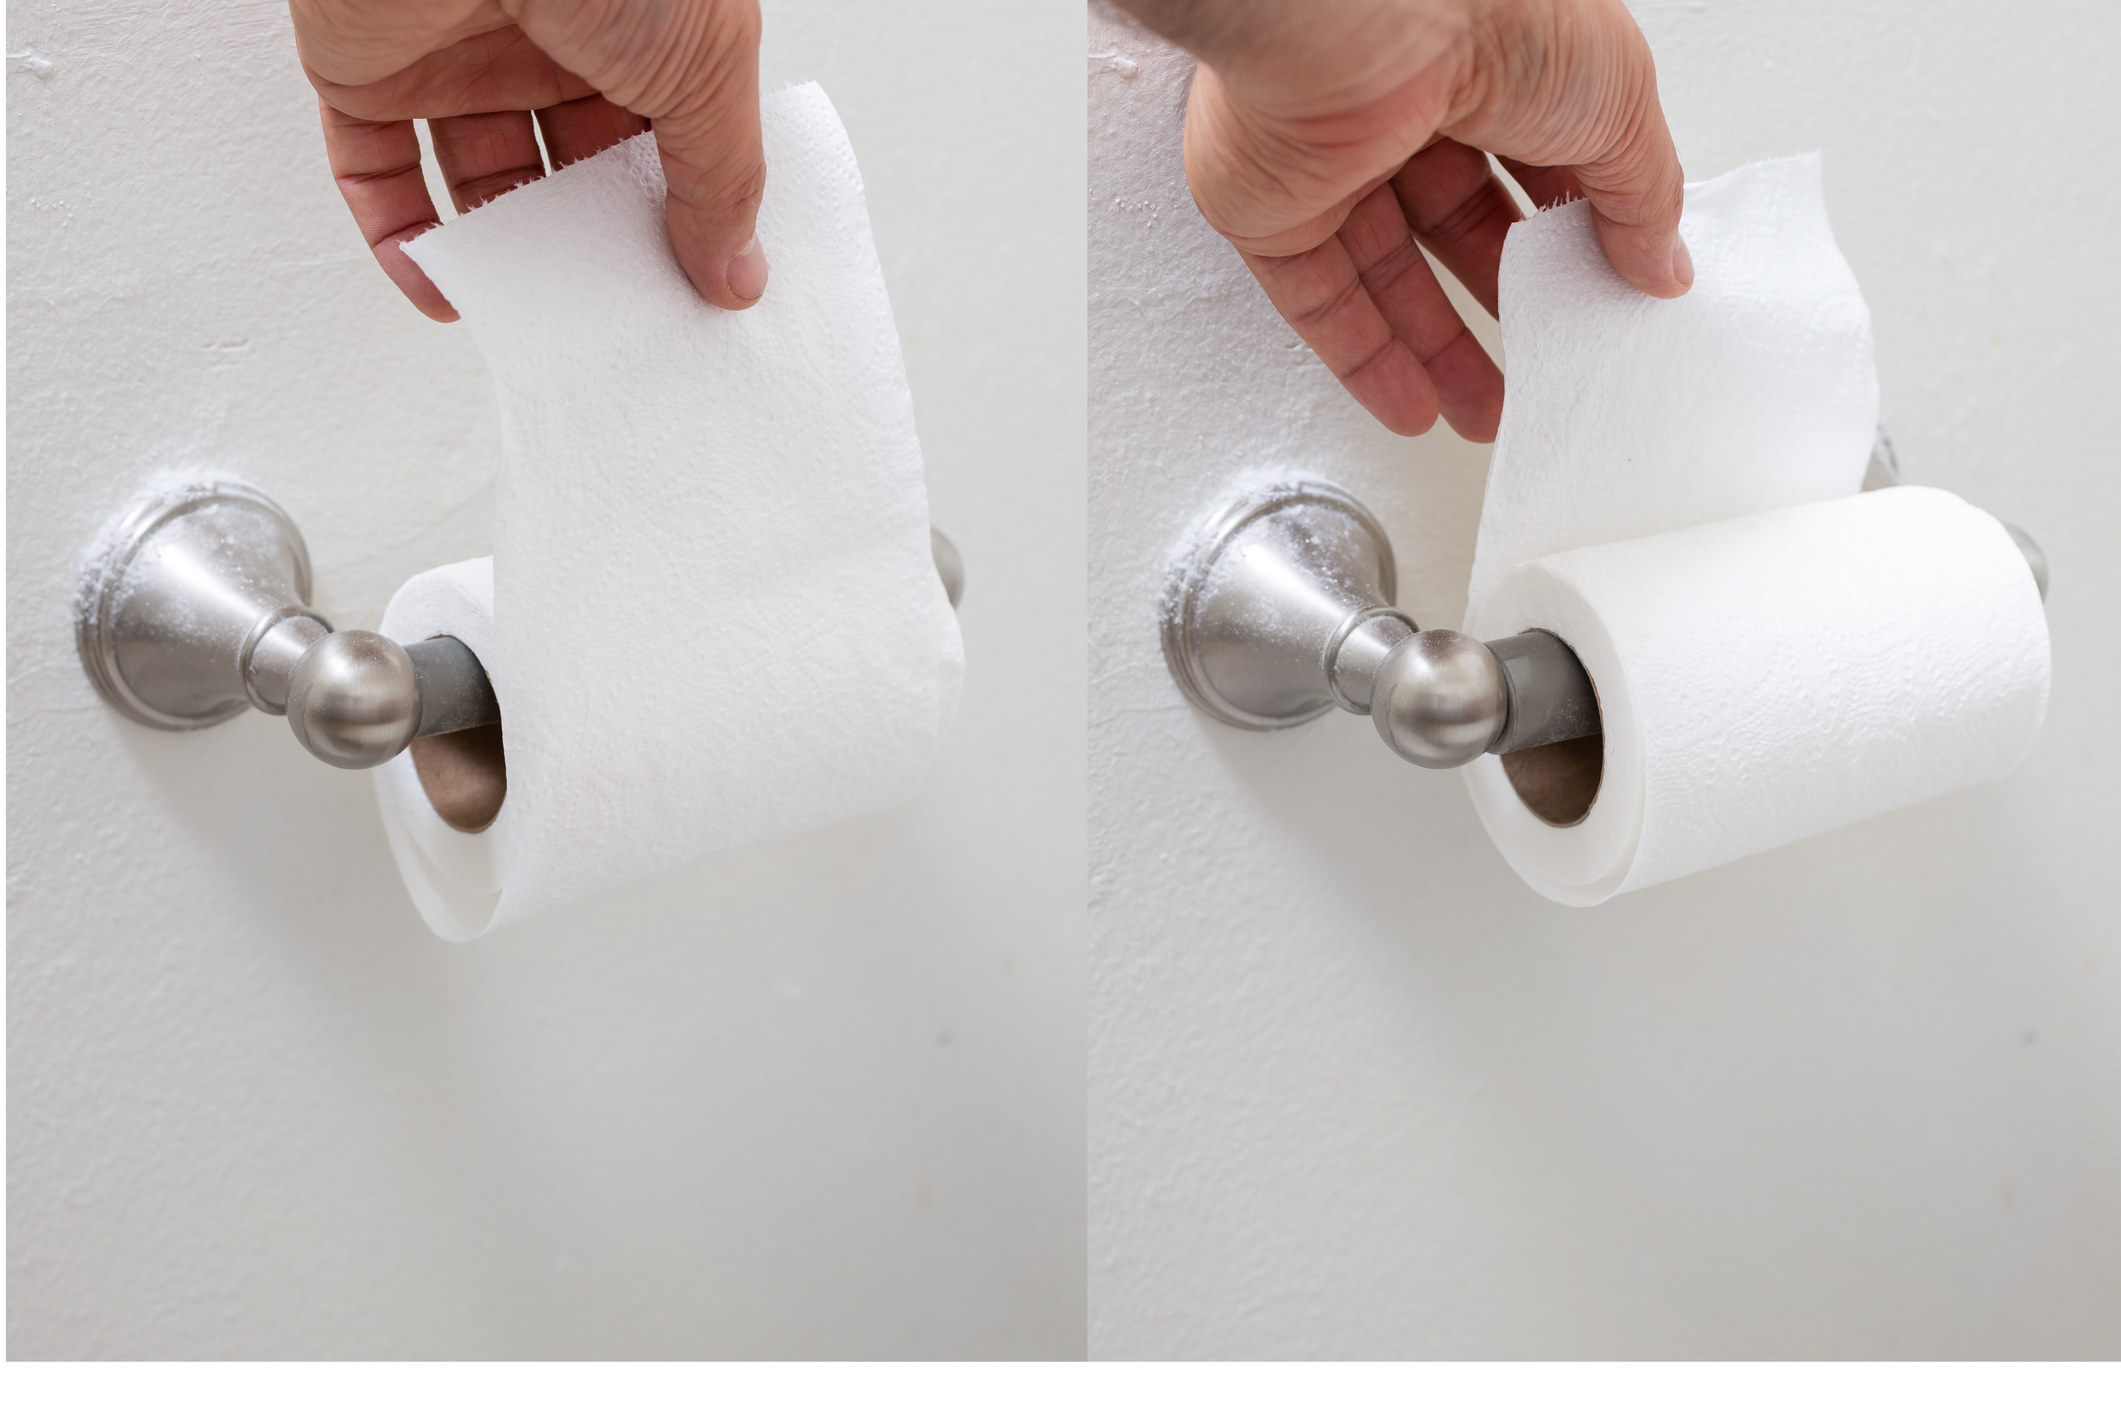 toilet paper rolls with different orientations